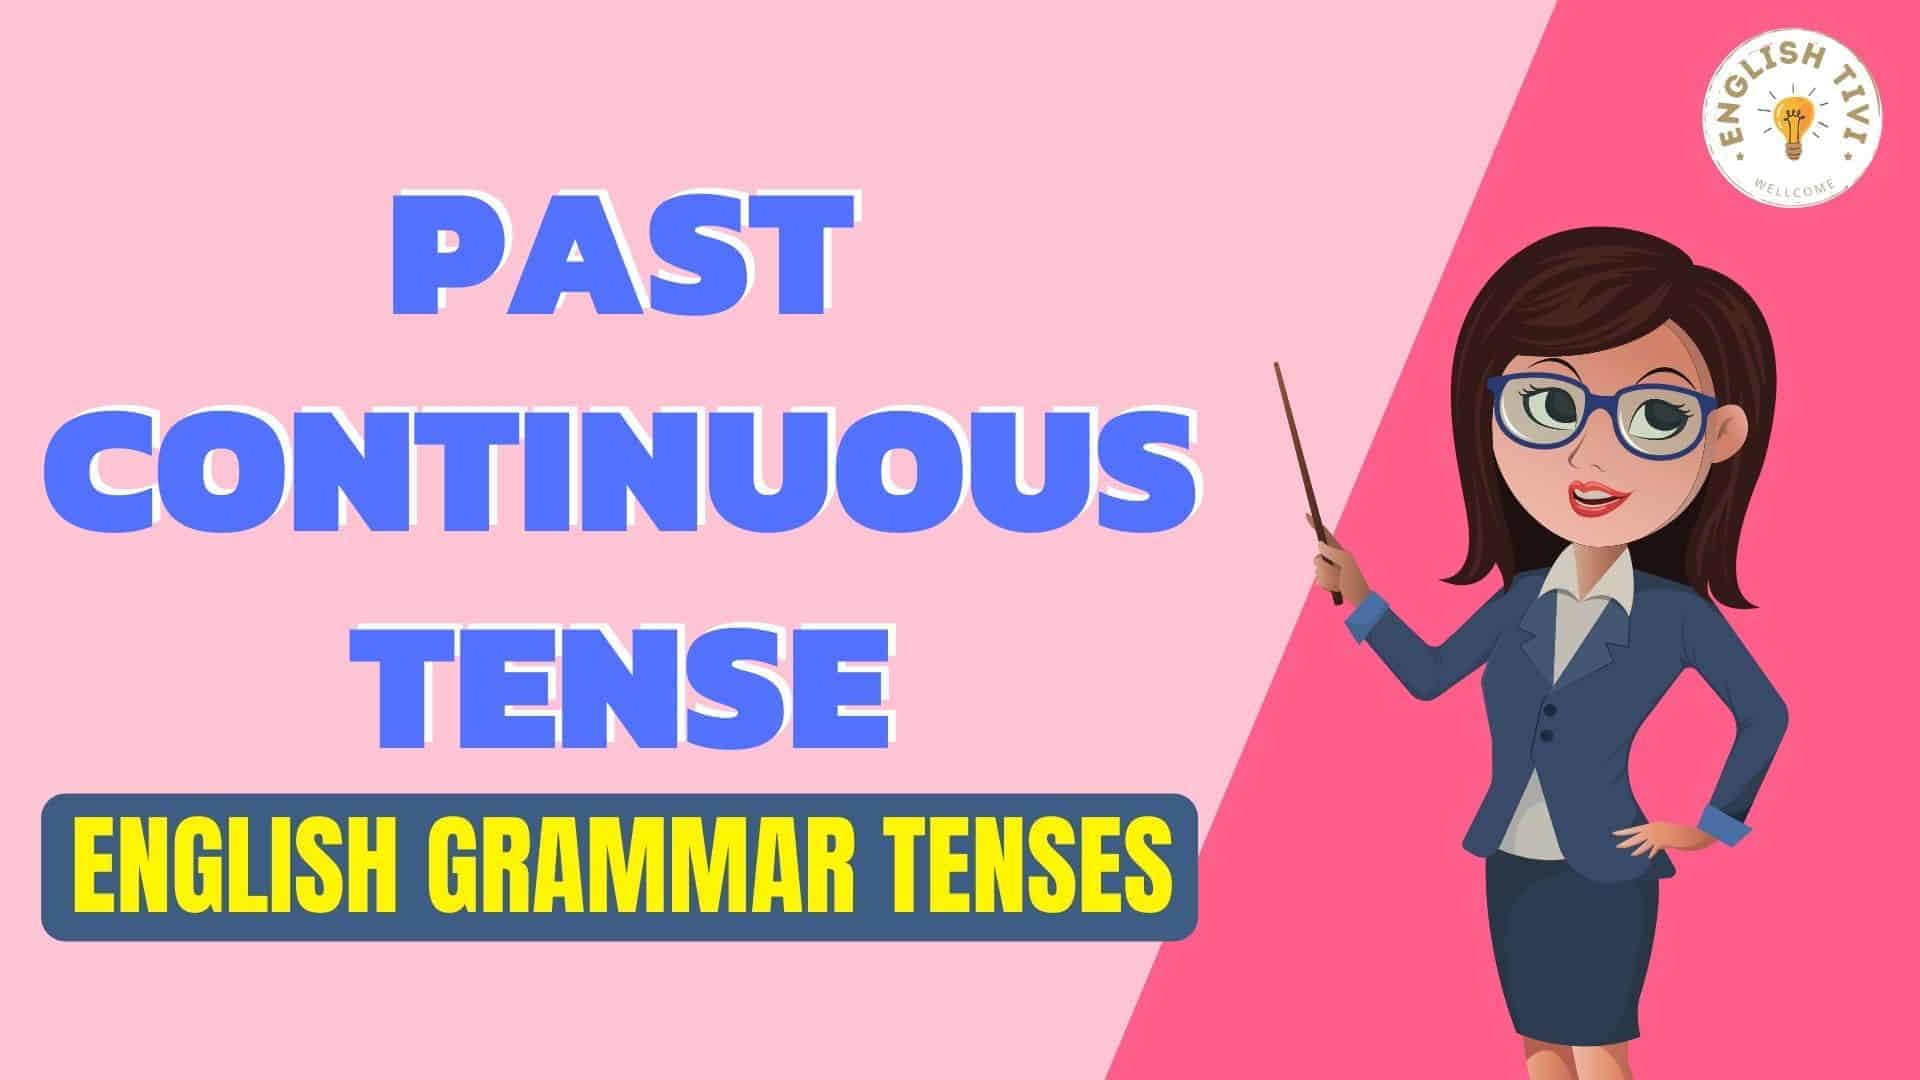 past-perfect-continuous-tense-examples-worksheets-education-worksheet